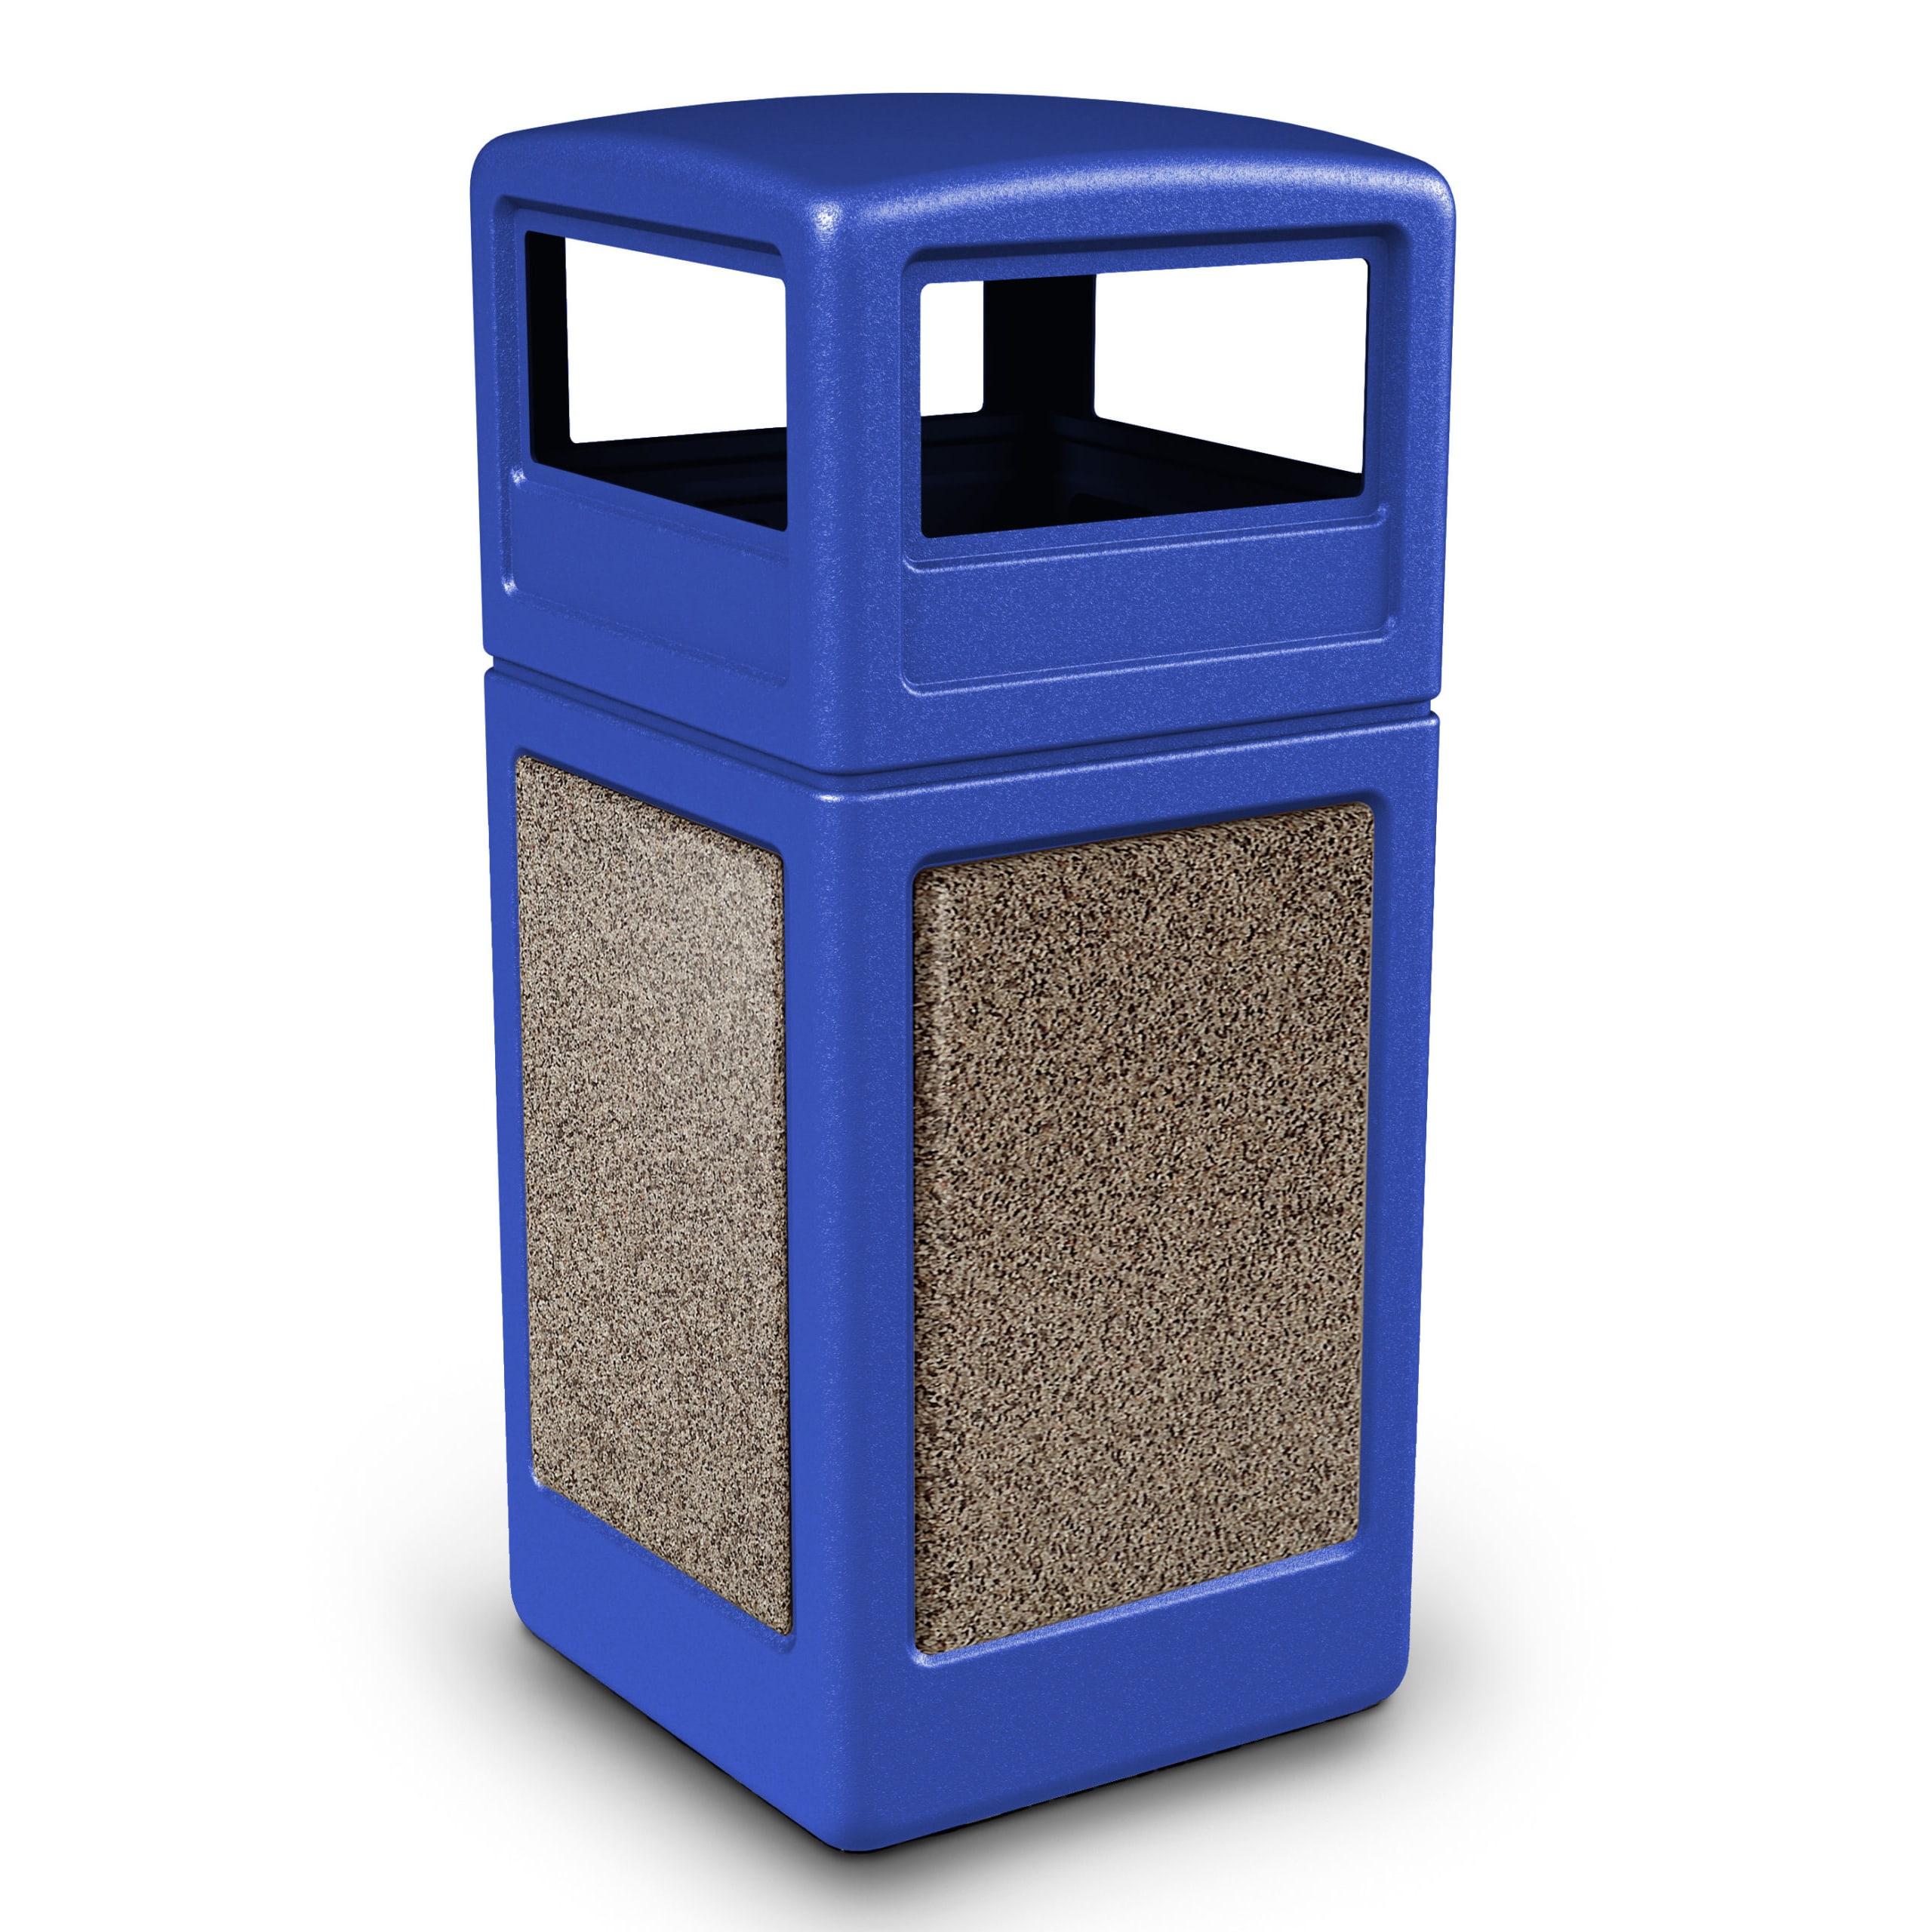 https://www.commercialzone.com/wp-content/uploads/2022/09/720432K-StoneTec-Series-42-Gallon-Square-Waste-Receptacle-with-Dome-Lid-Blue-Riverstone-scaled-2.jpg